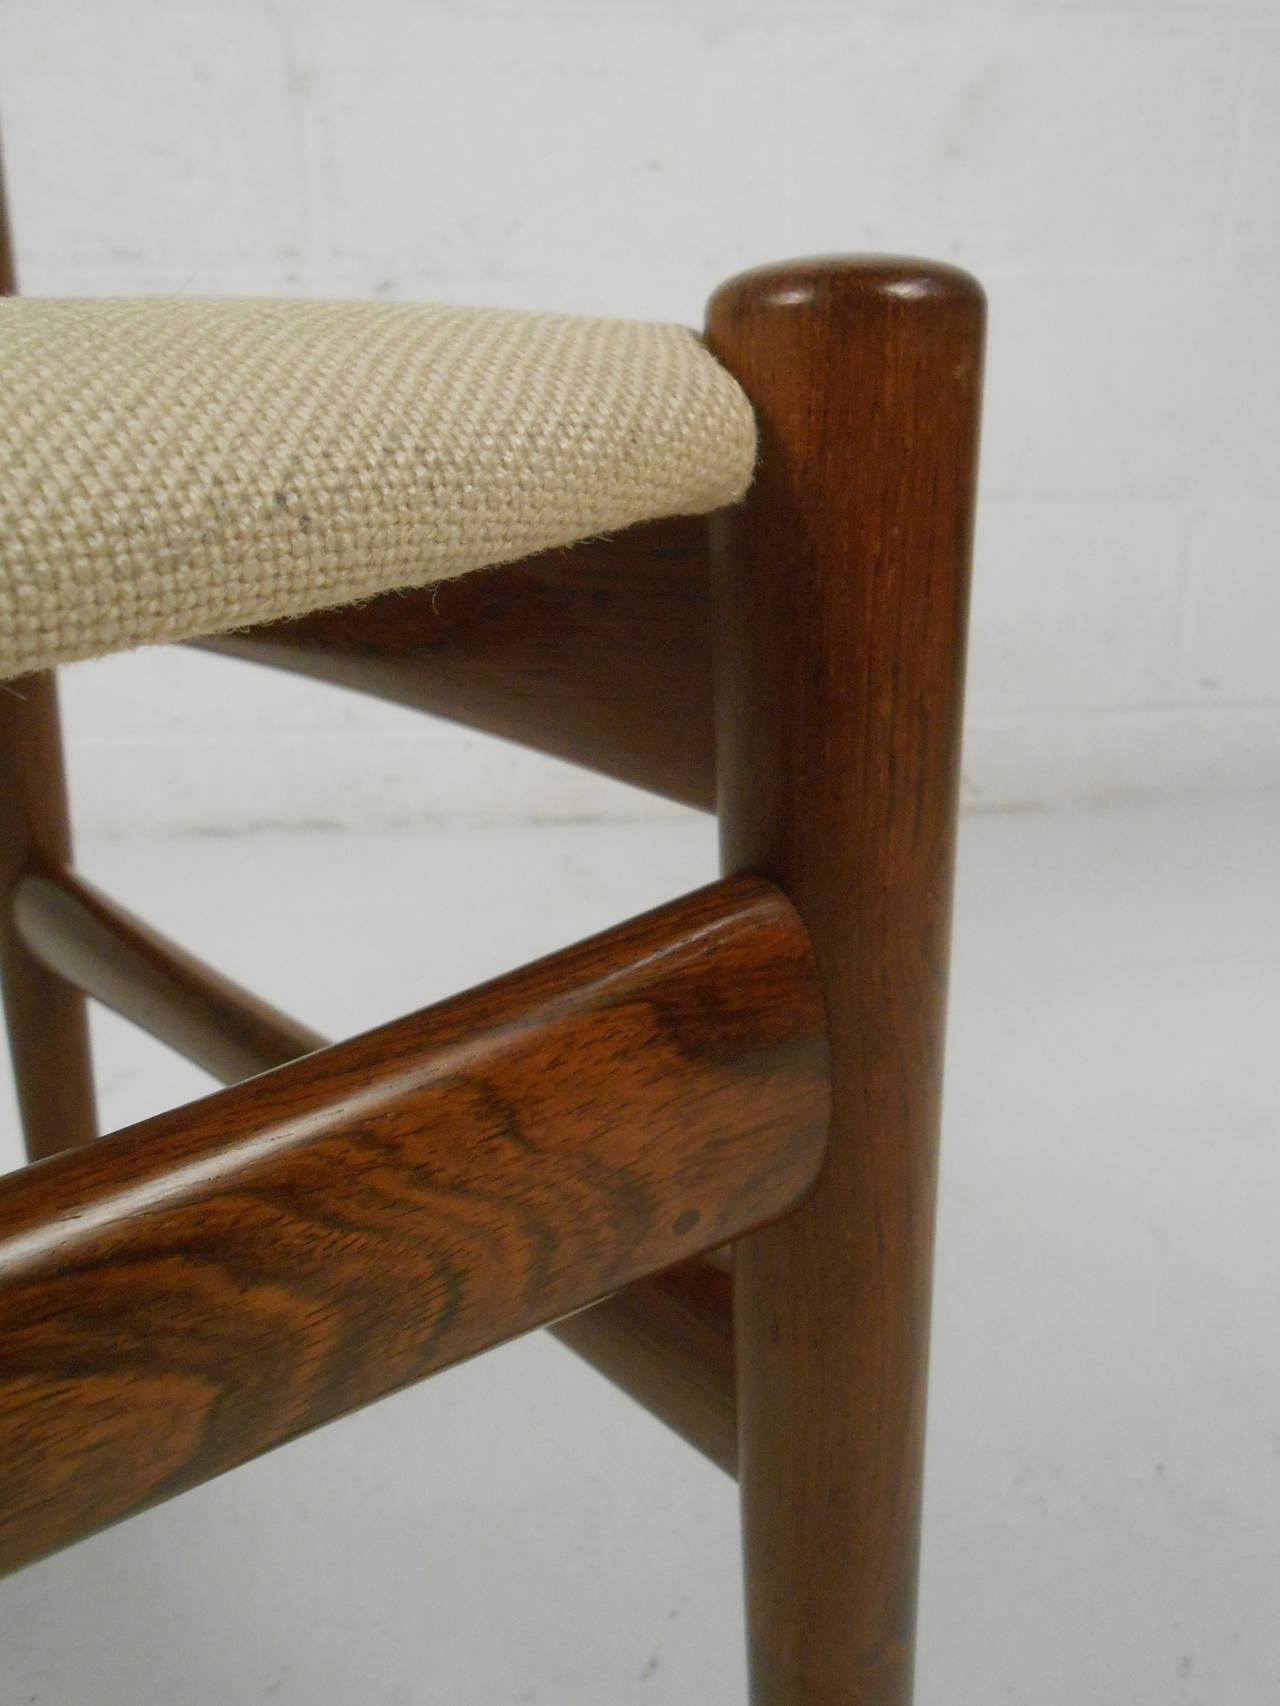 Mid-20th Century Danish Rosewood Dining Chairs